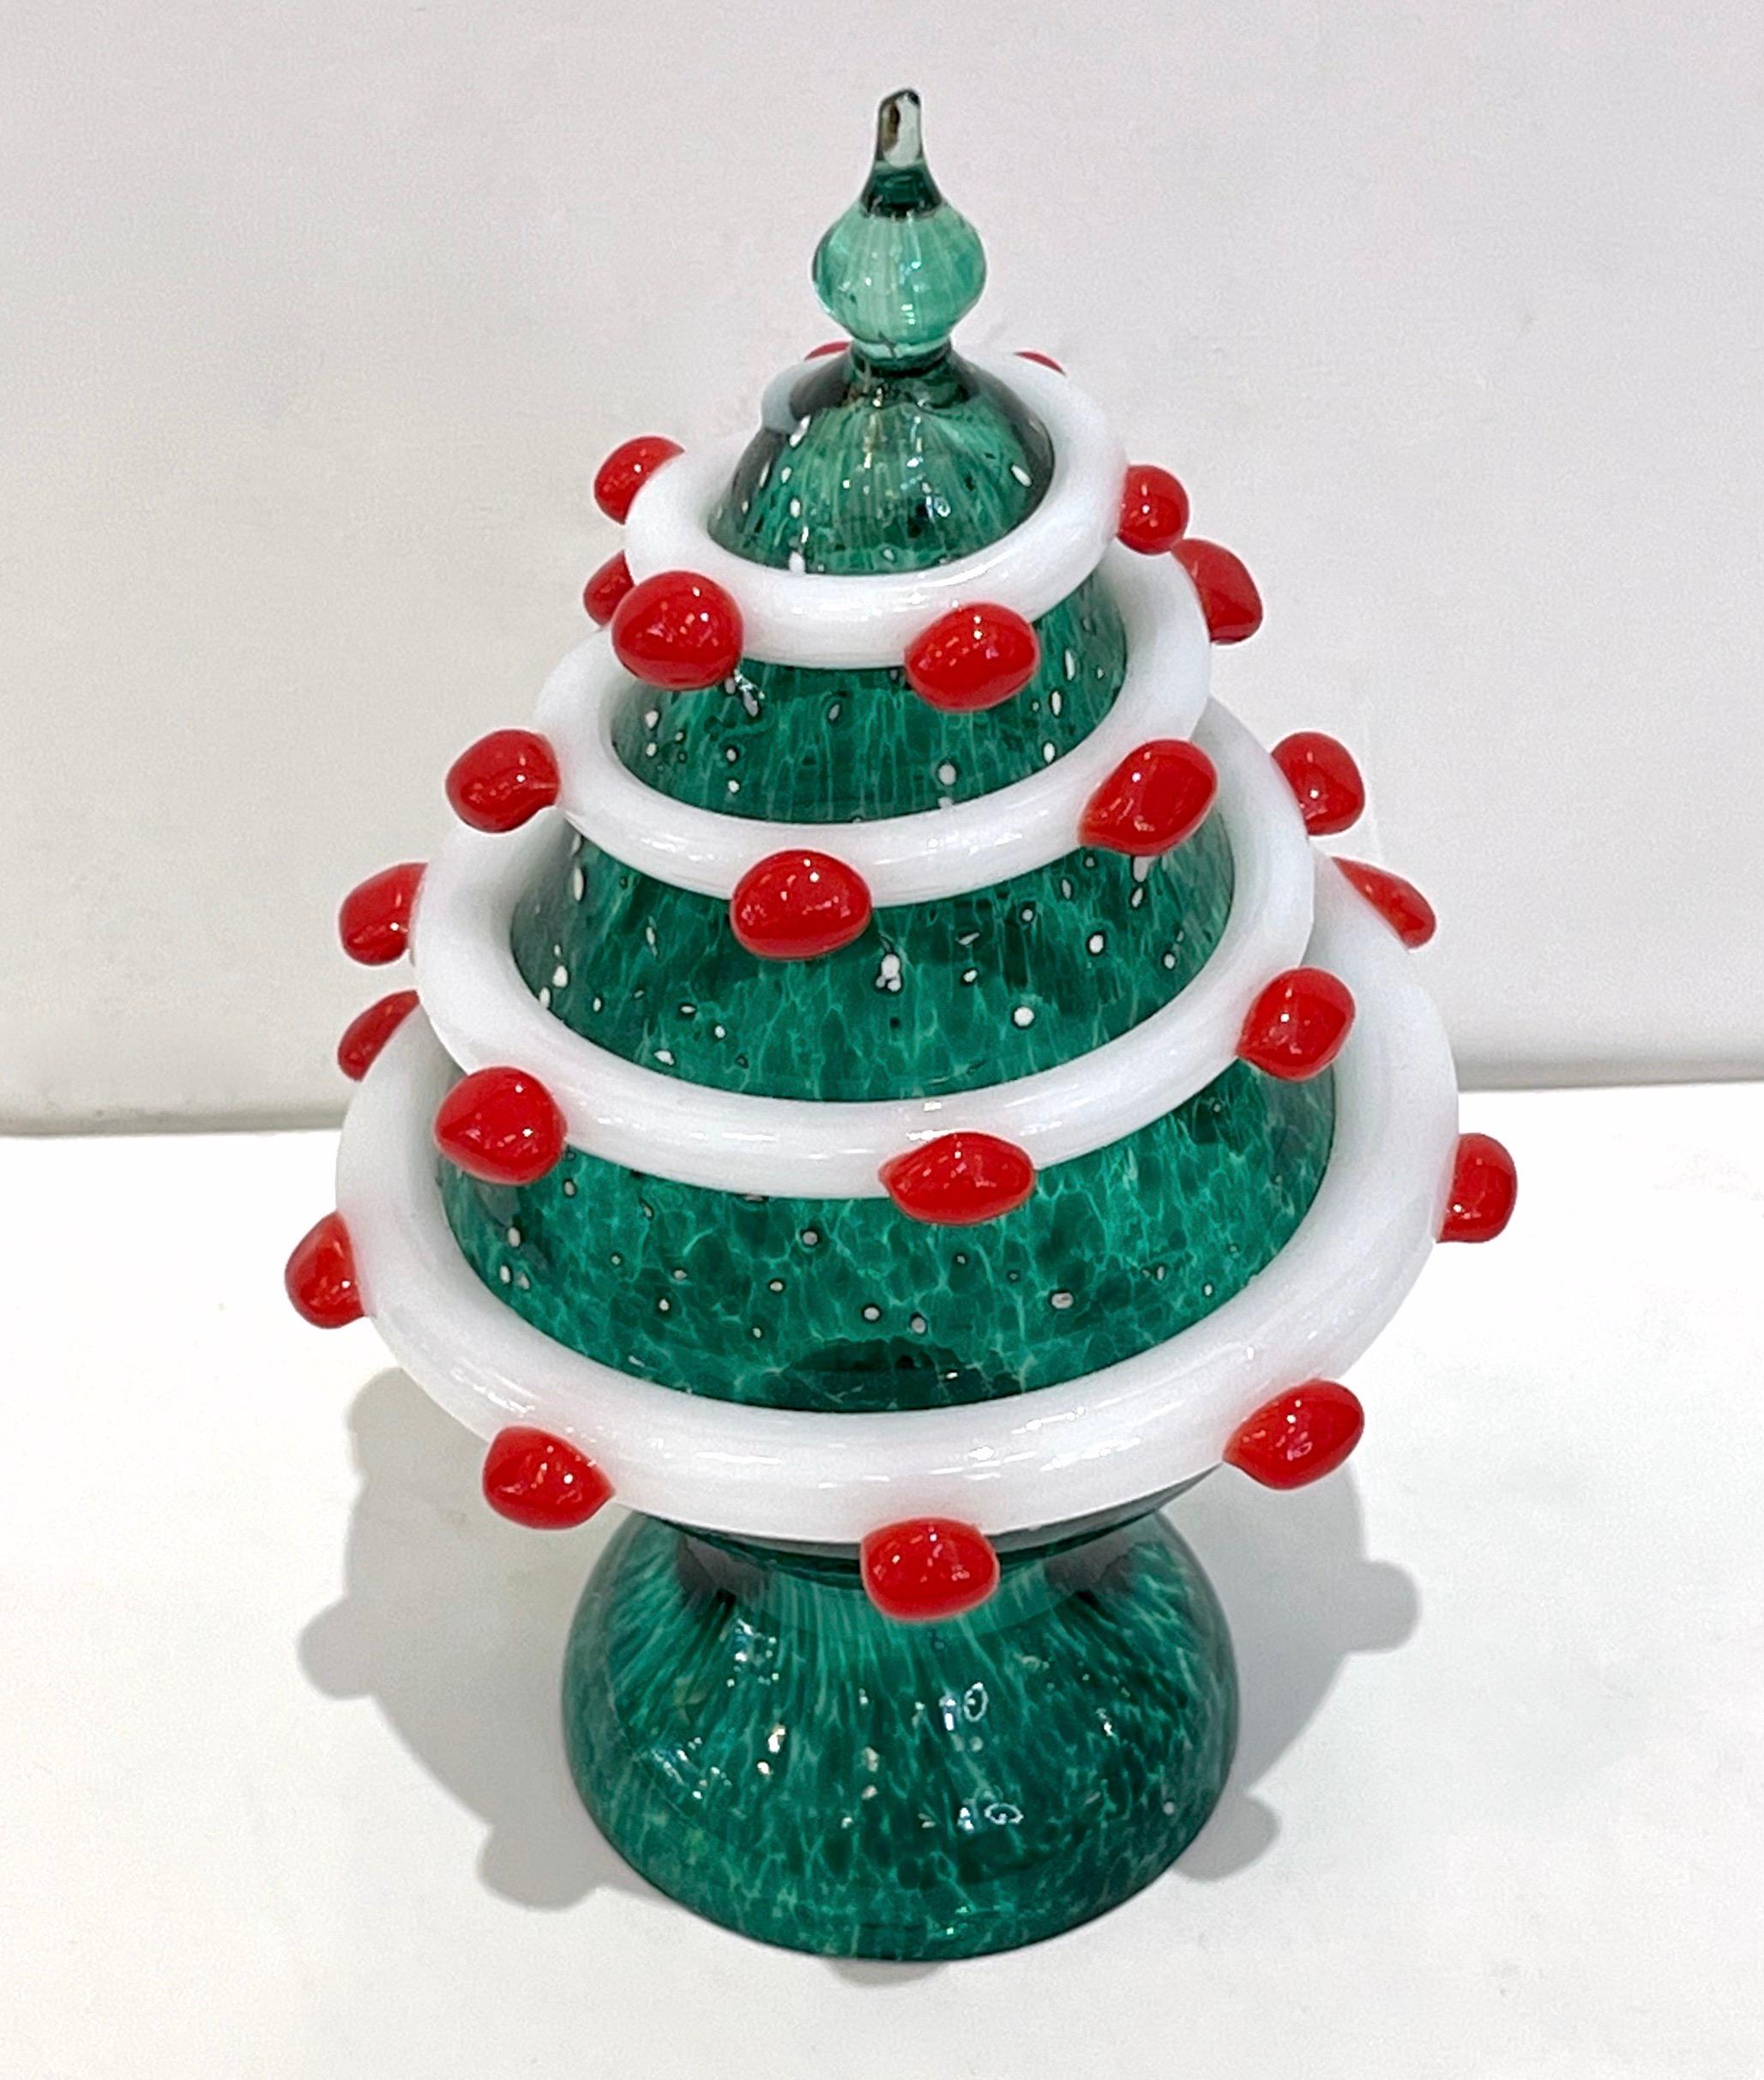 An exquisite Murano glass tree sculpture of organic modern design, a creation labeled Galliano Ferro Murano, individually mouth-blown and handcrafted. The tree with a pinnacle in emerald green blown Murano glass is worked with a mottled technique